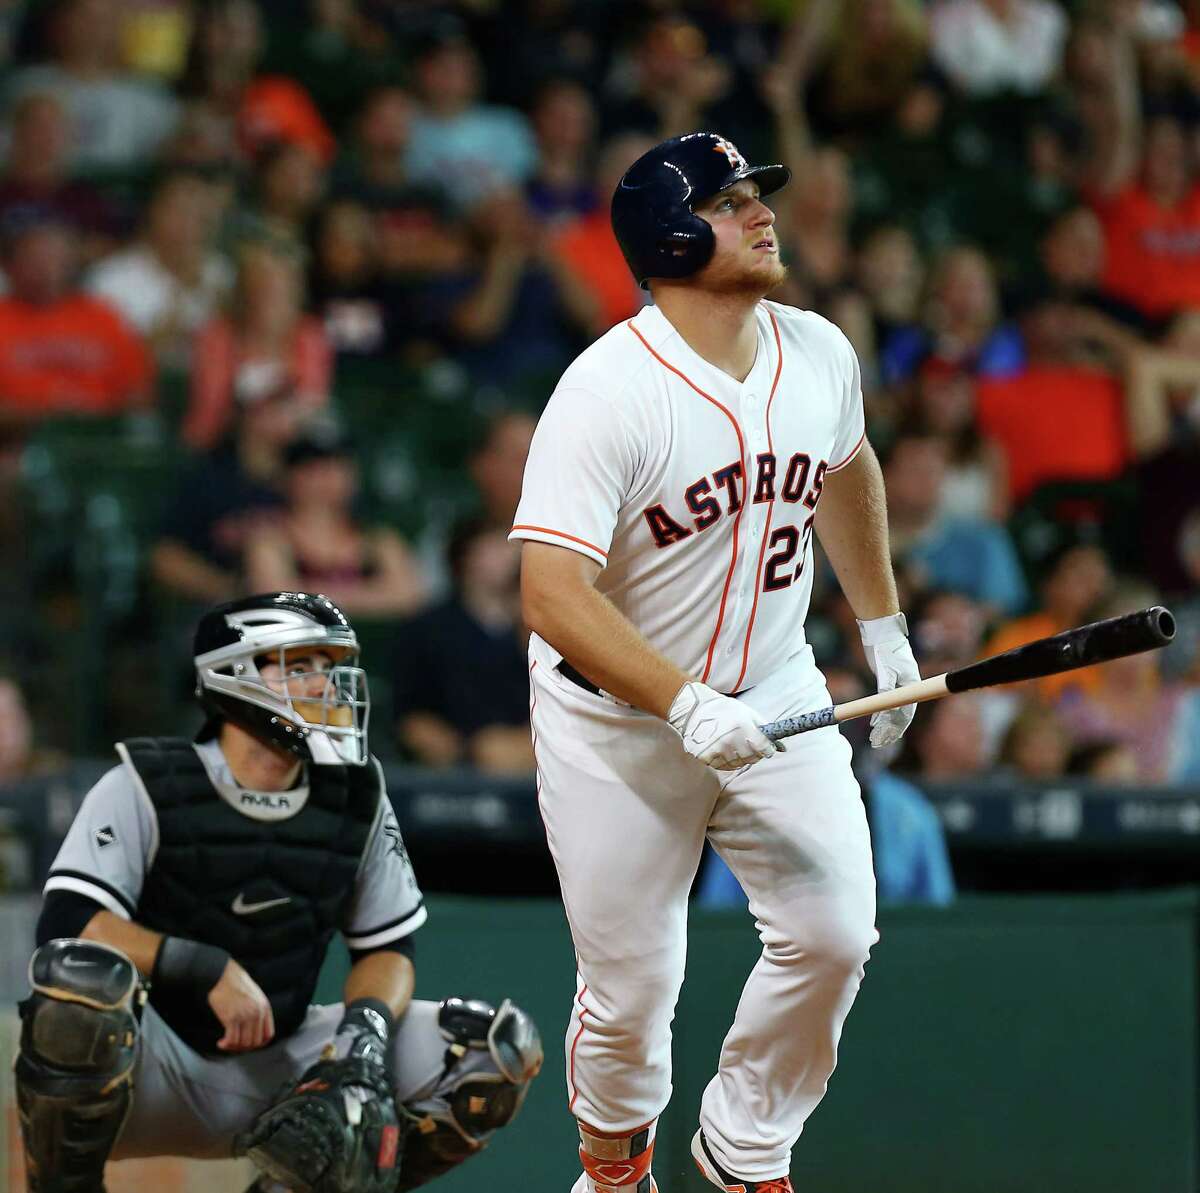 Houston Astros first baseman A.J. Reed (23) watches his home run, the first of his major league career, go over the outfield wall during the ninth inning of an MLB game at Minute Maid Park, Saturday, July 2, 2016, in Houston.